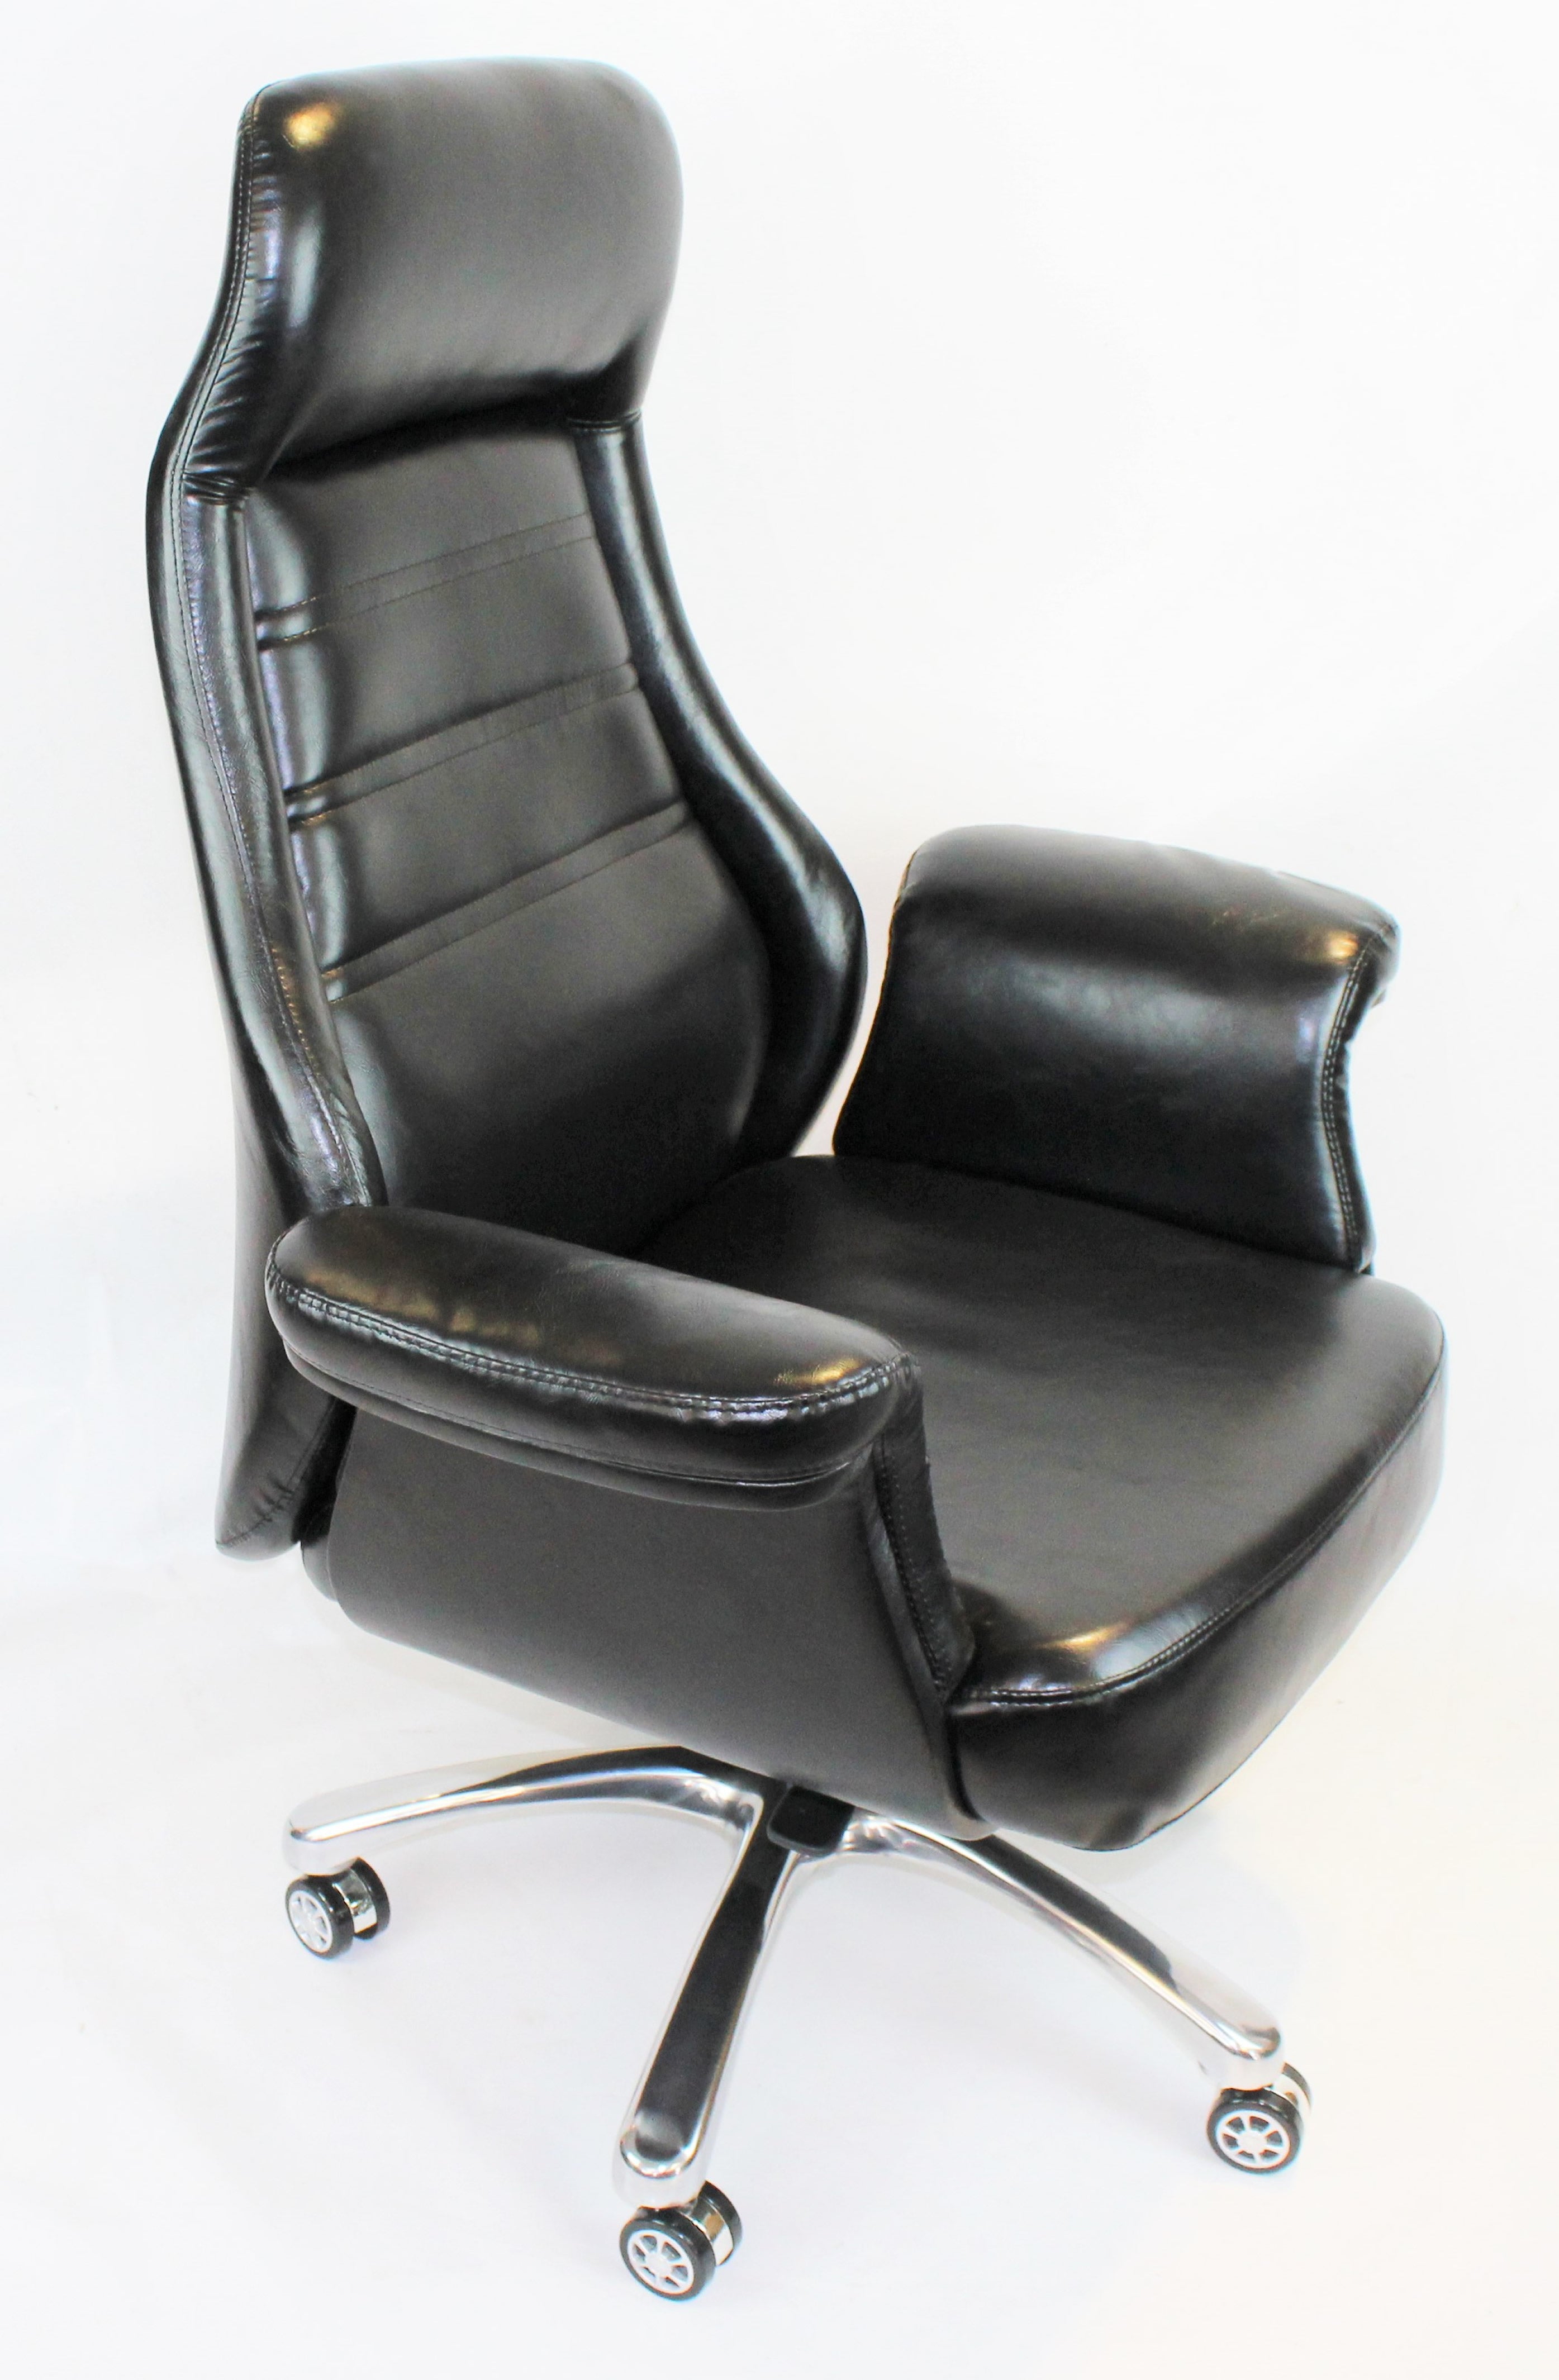 Black Leather Executive Office Chair - DH-090